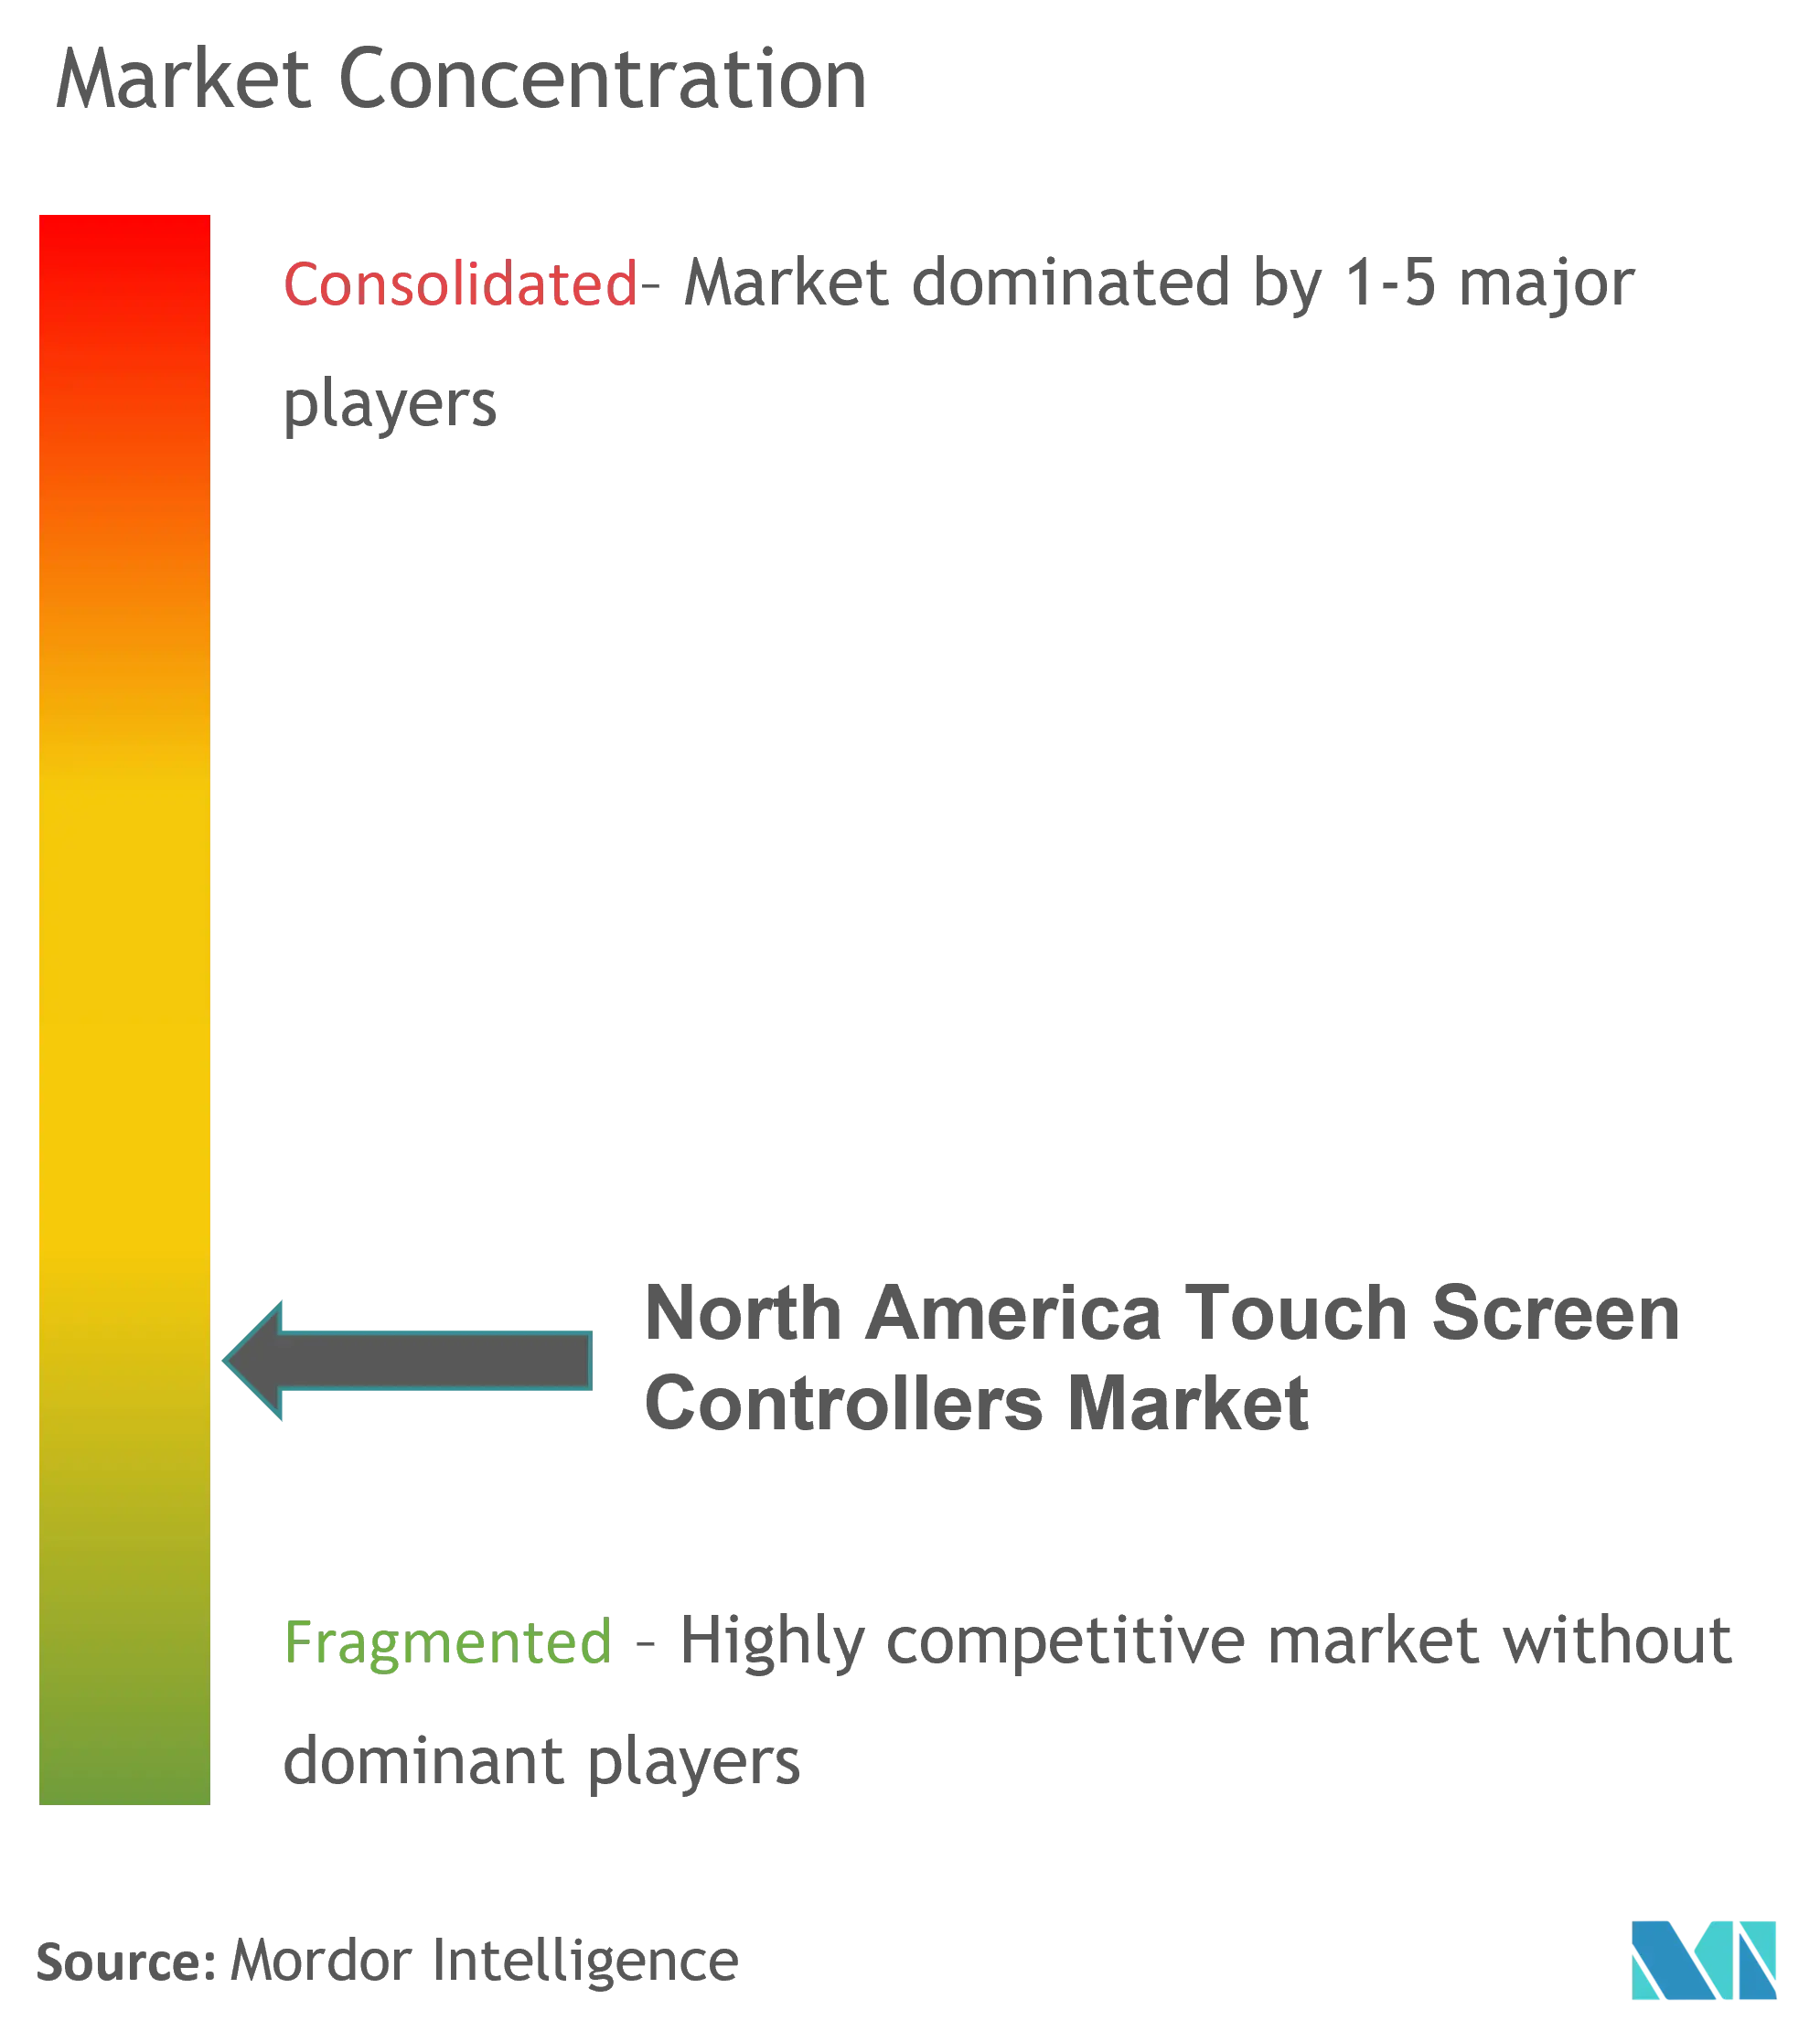 North America Touch Screen Controllers Market Concentration